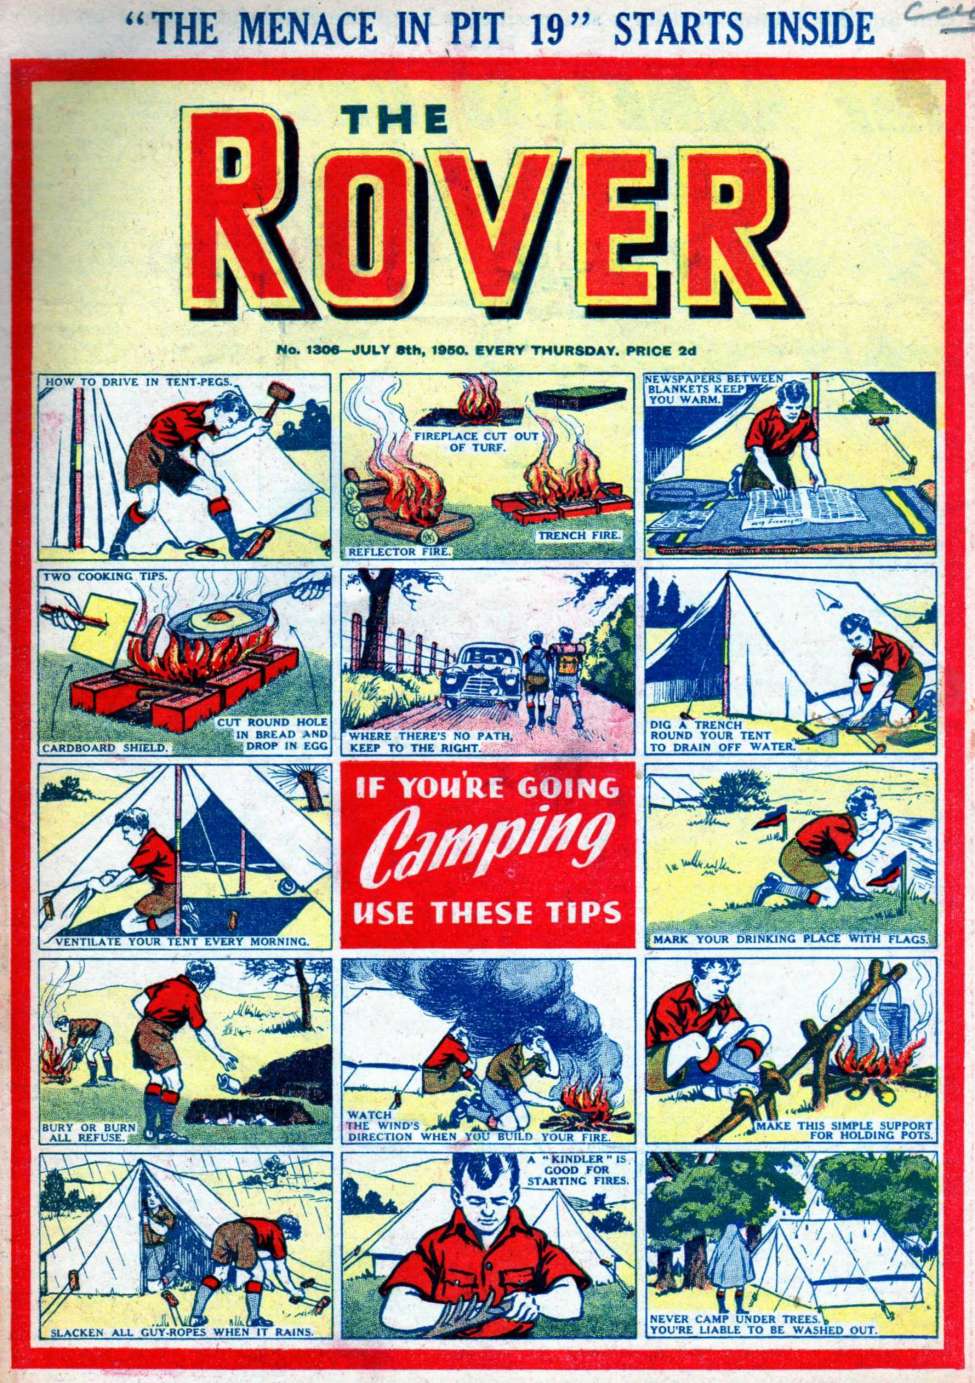 Book Cover For The Rover 1306